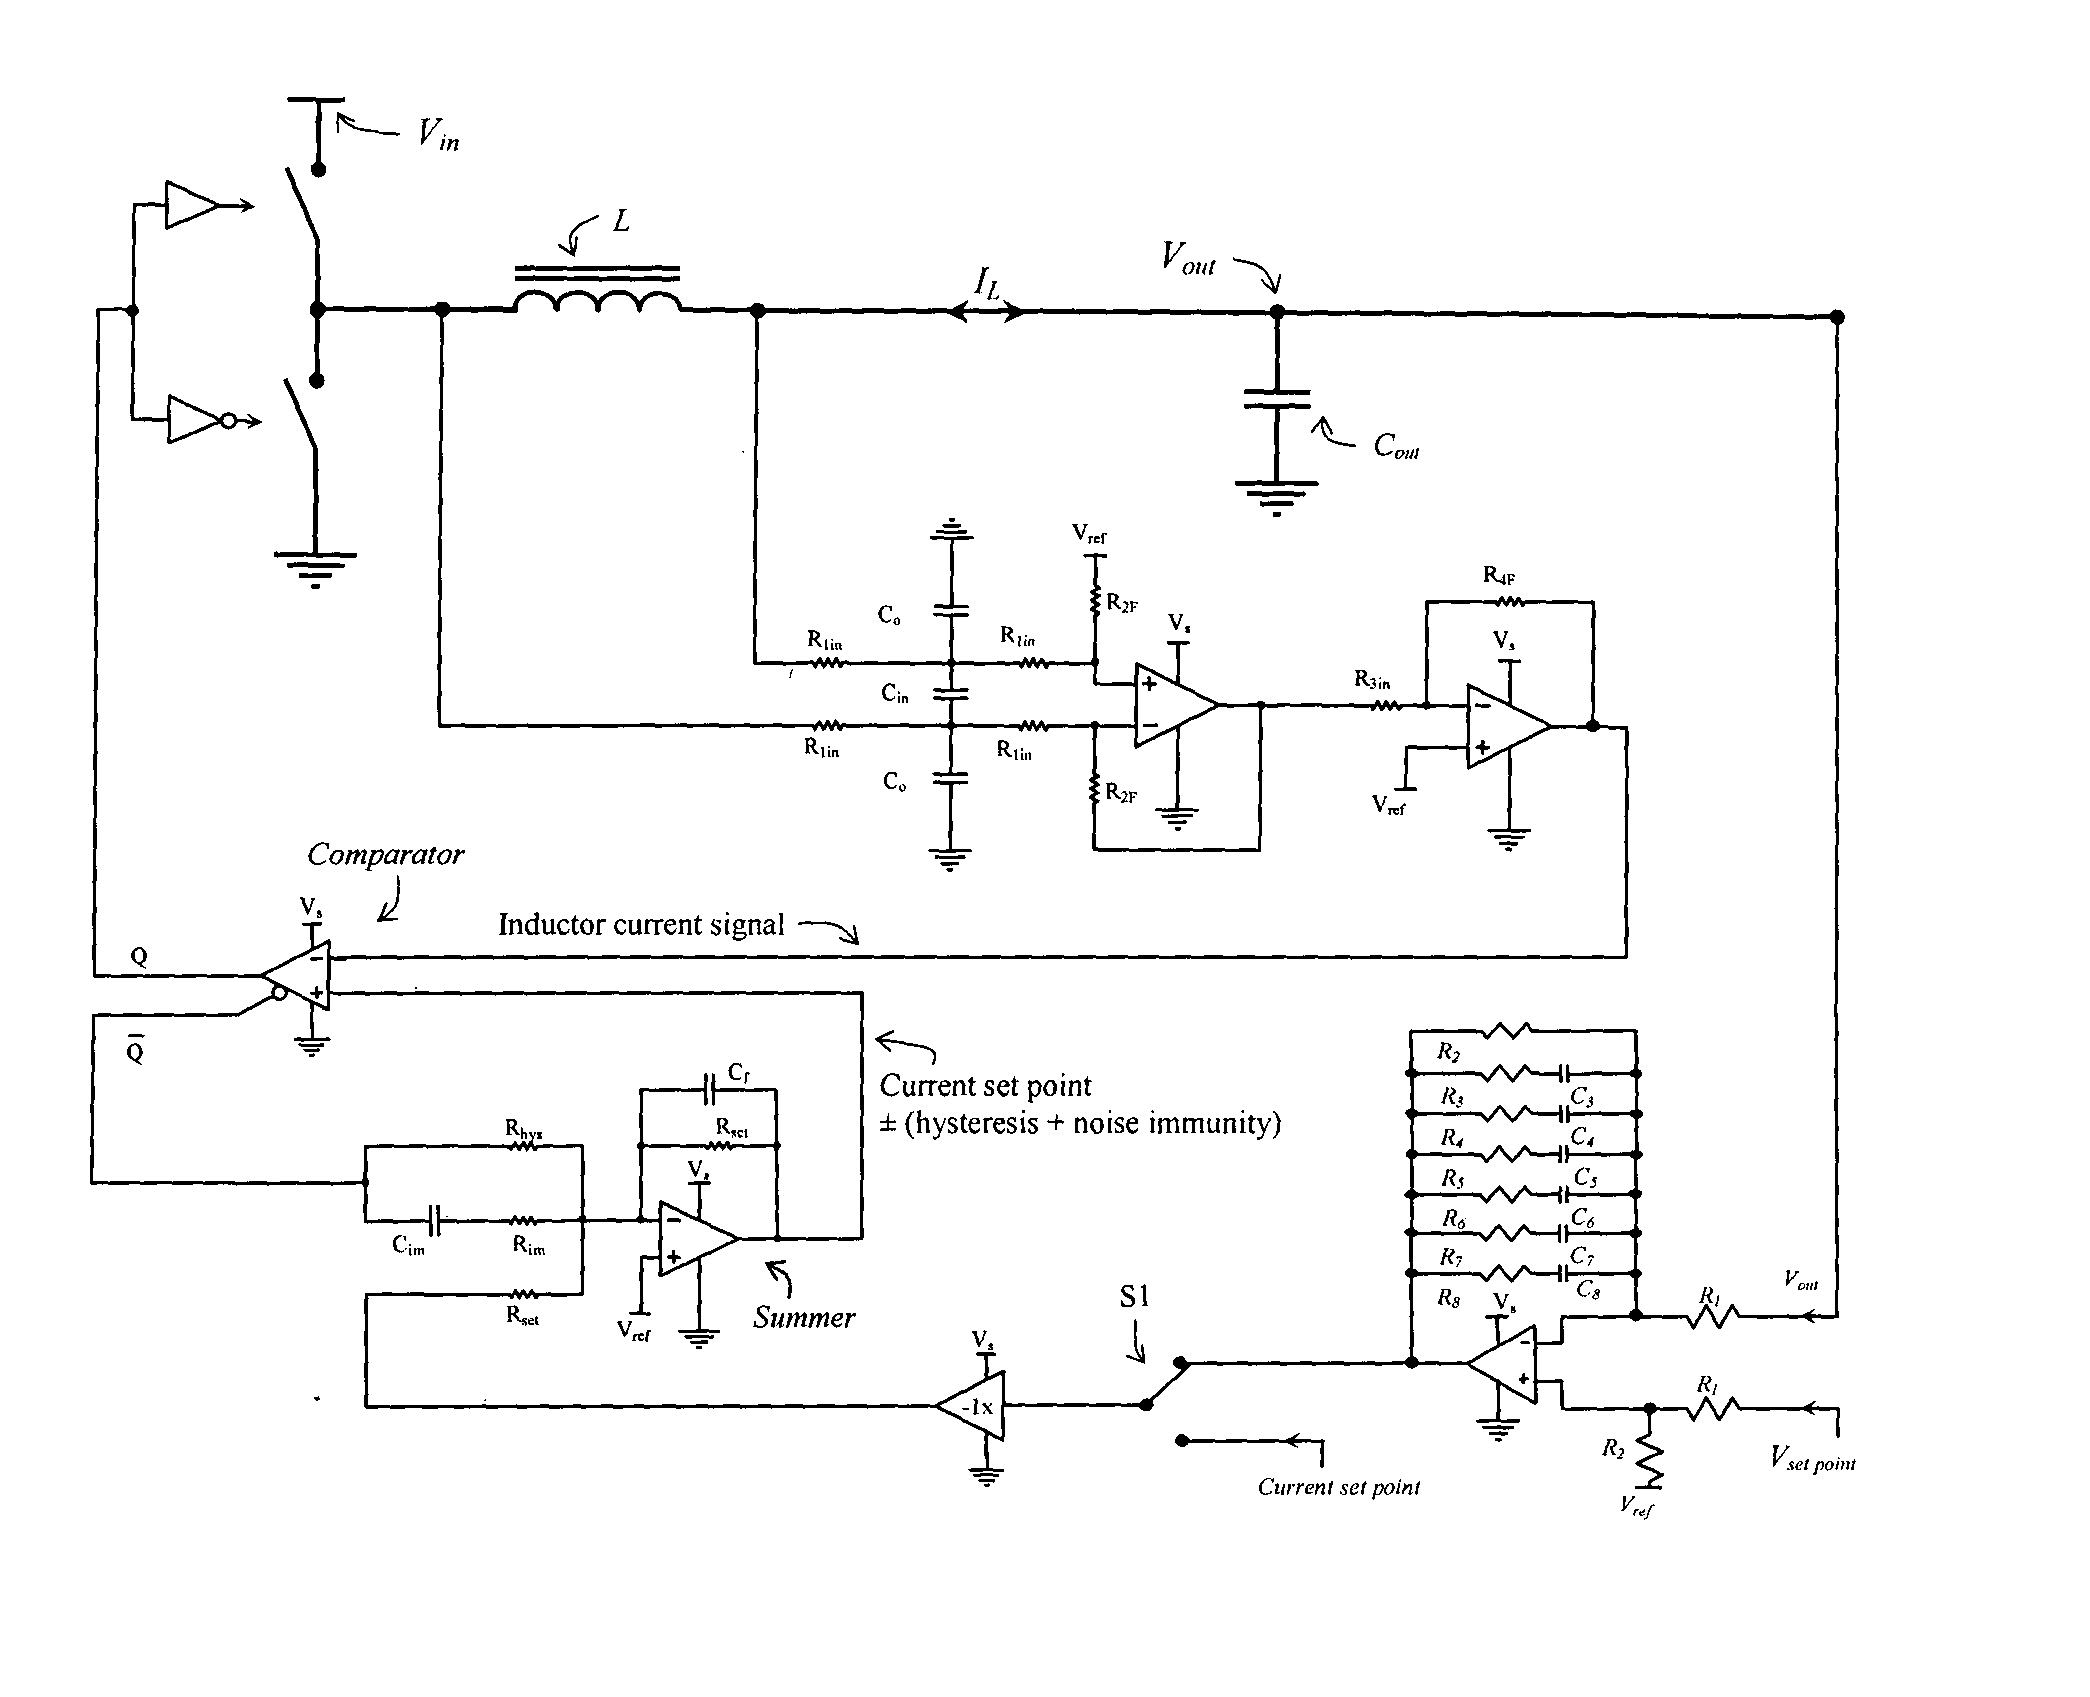 Hysteretic current mode controller for a bidirectional converter with lossless inductor current sensing